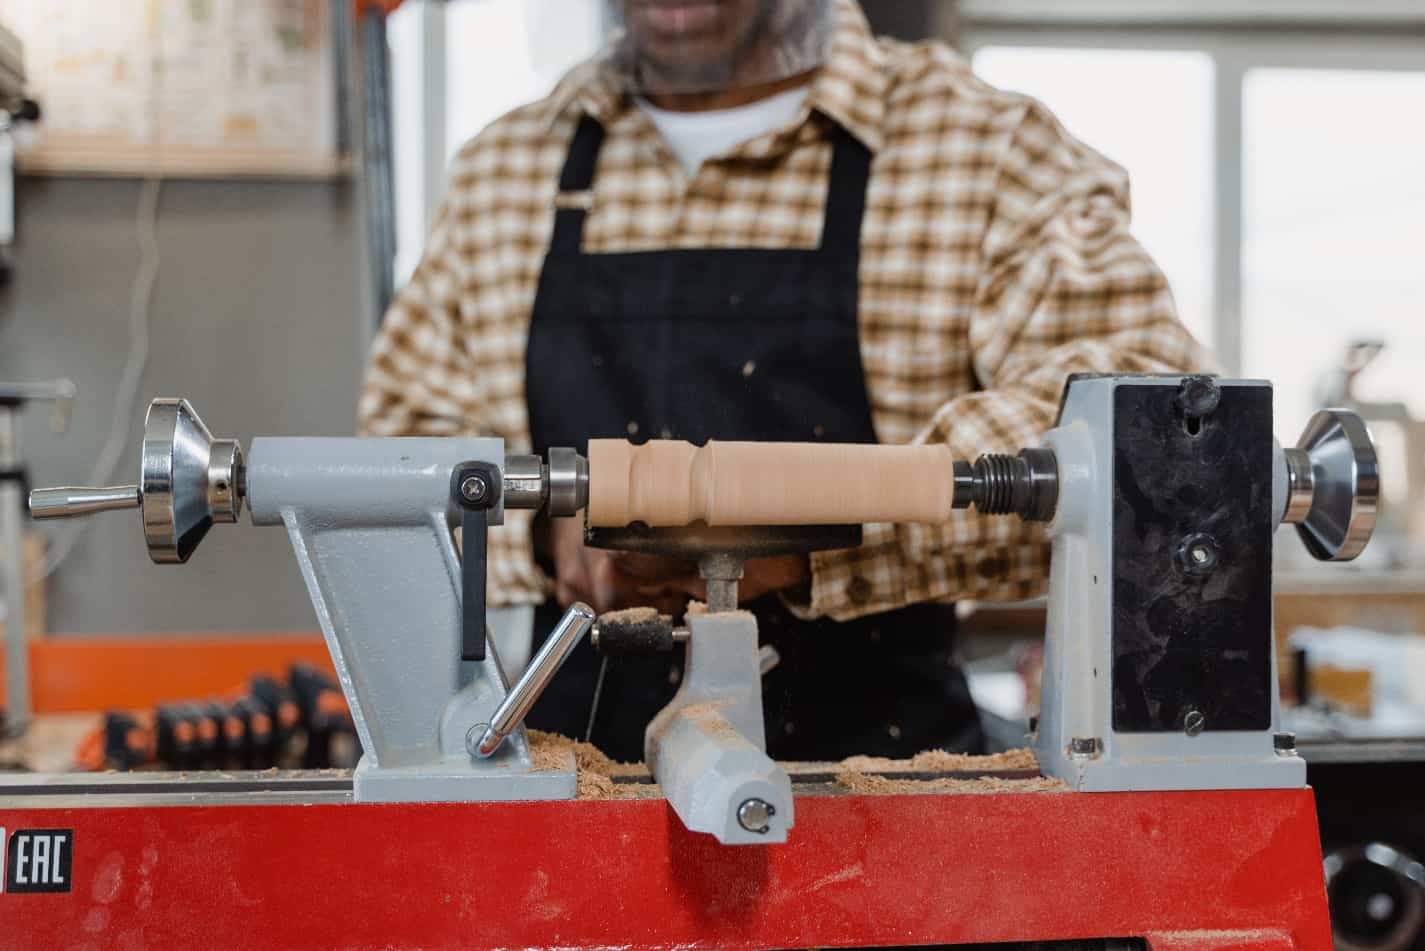 How Much Does a Wood Lathe Cost?